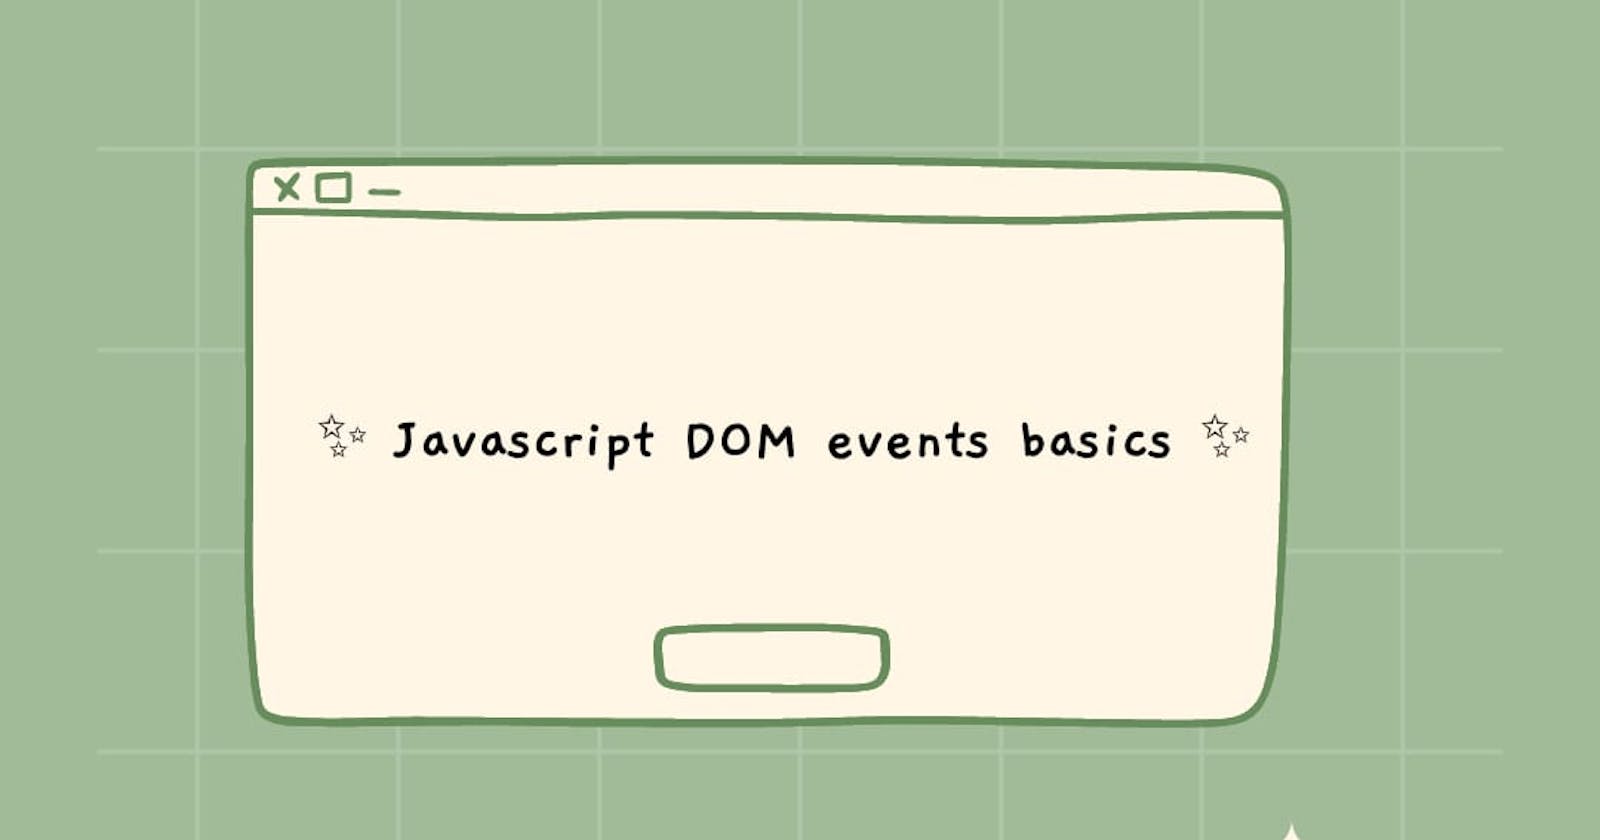 A quick introduction to JavaScript DOM events